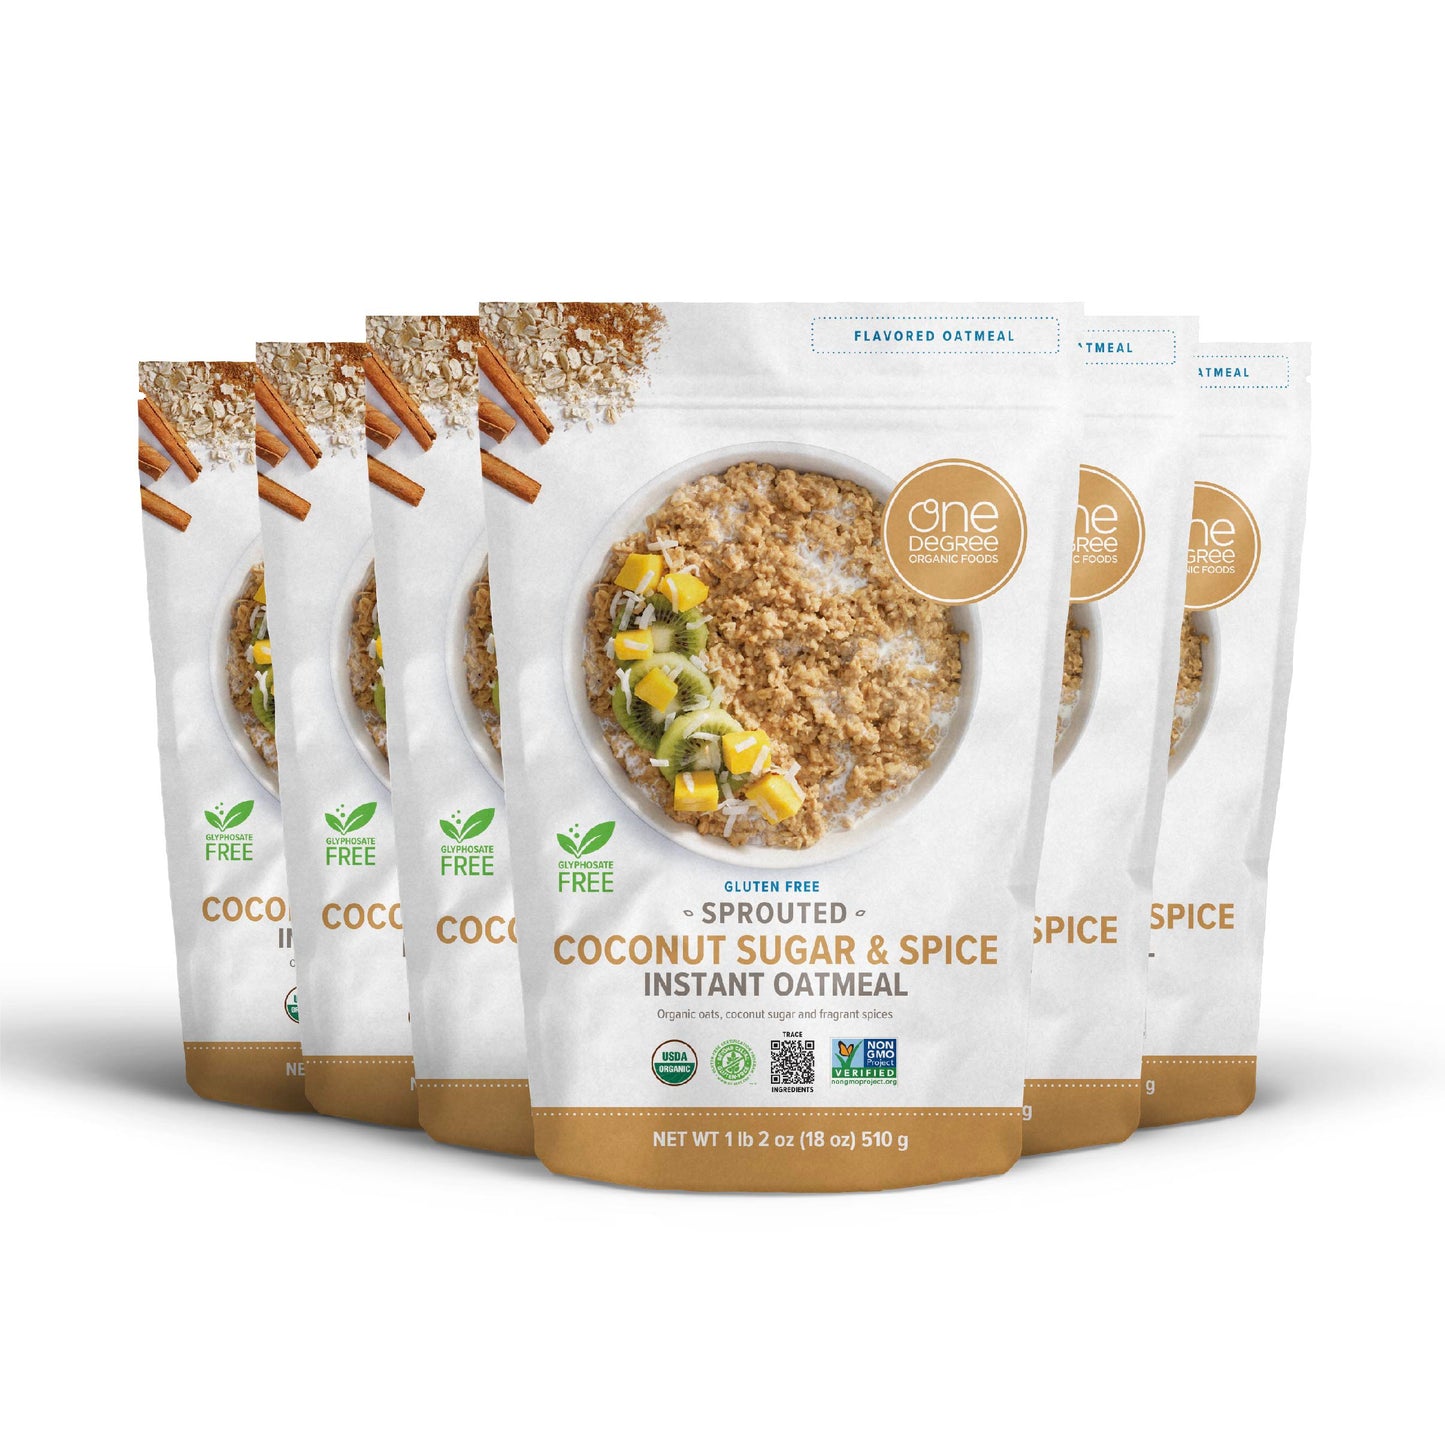 Sprouted Coconut Sugar & Spice Organic Instant Oatmeal